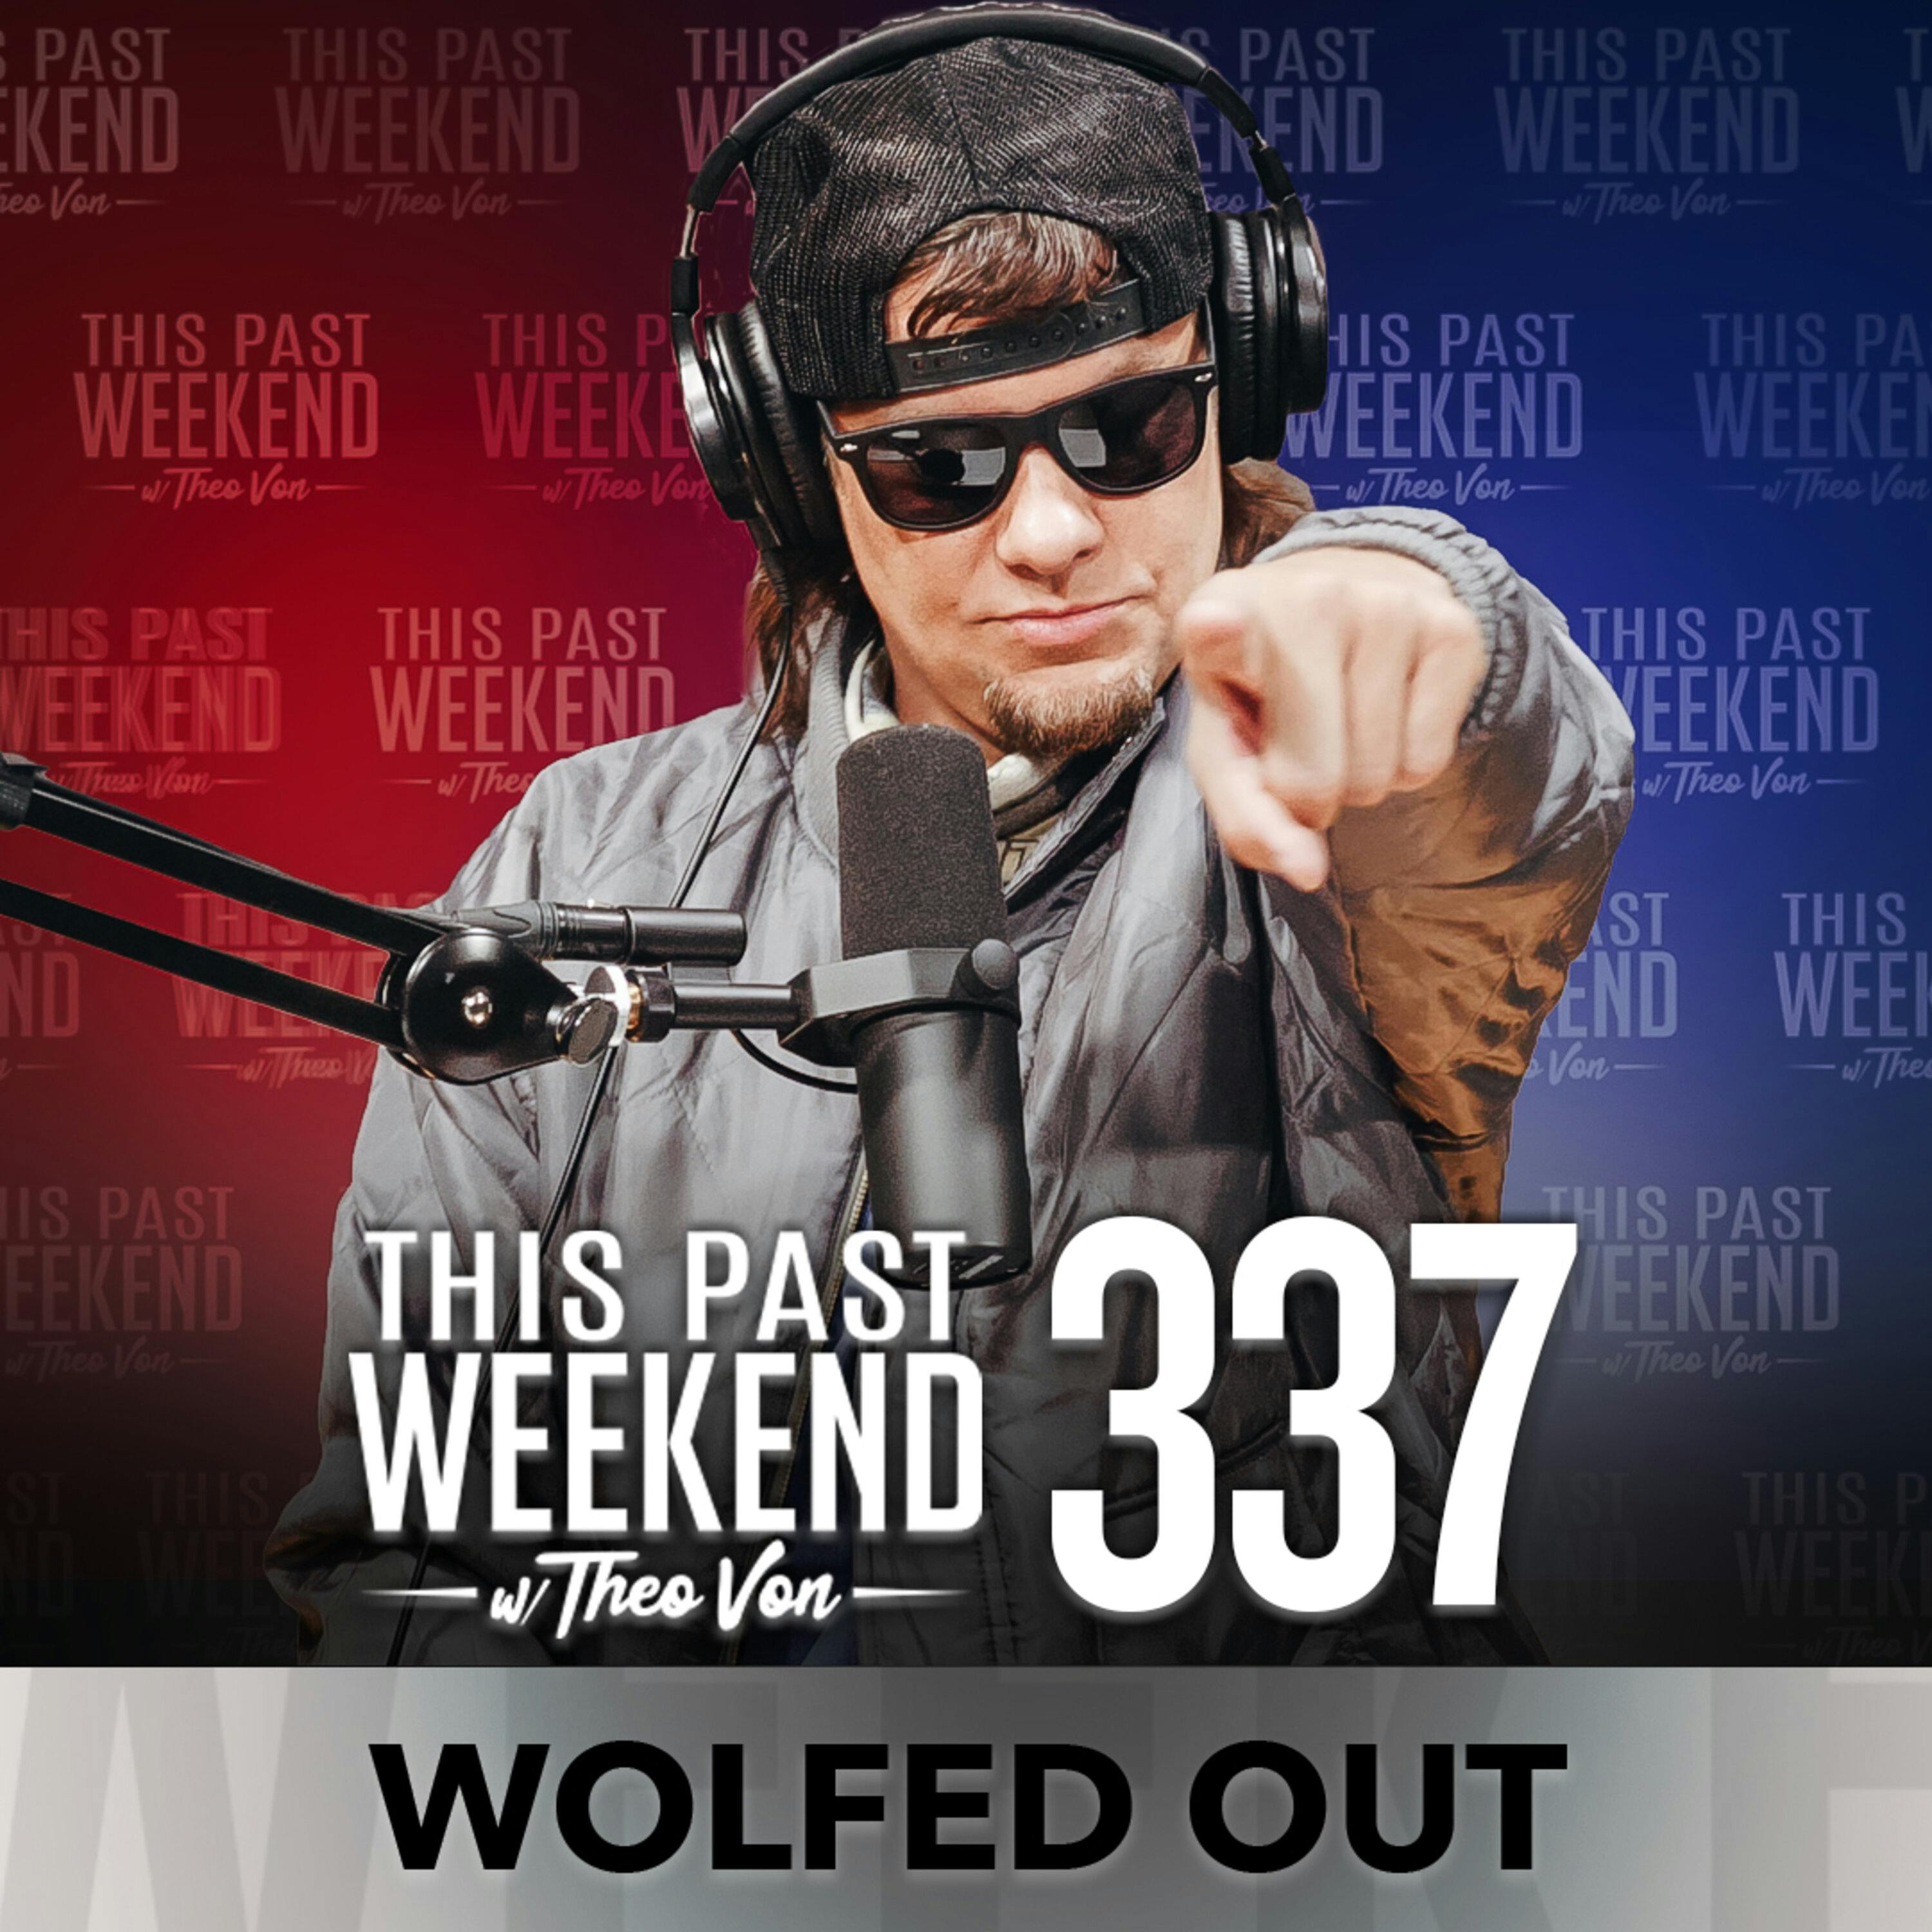 E337 Wolfed Out by Theo Von